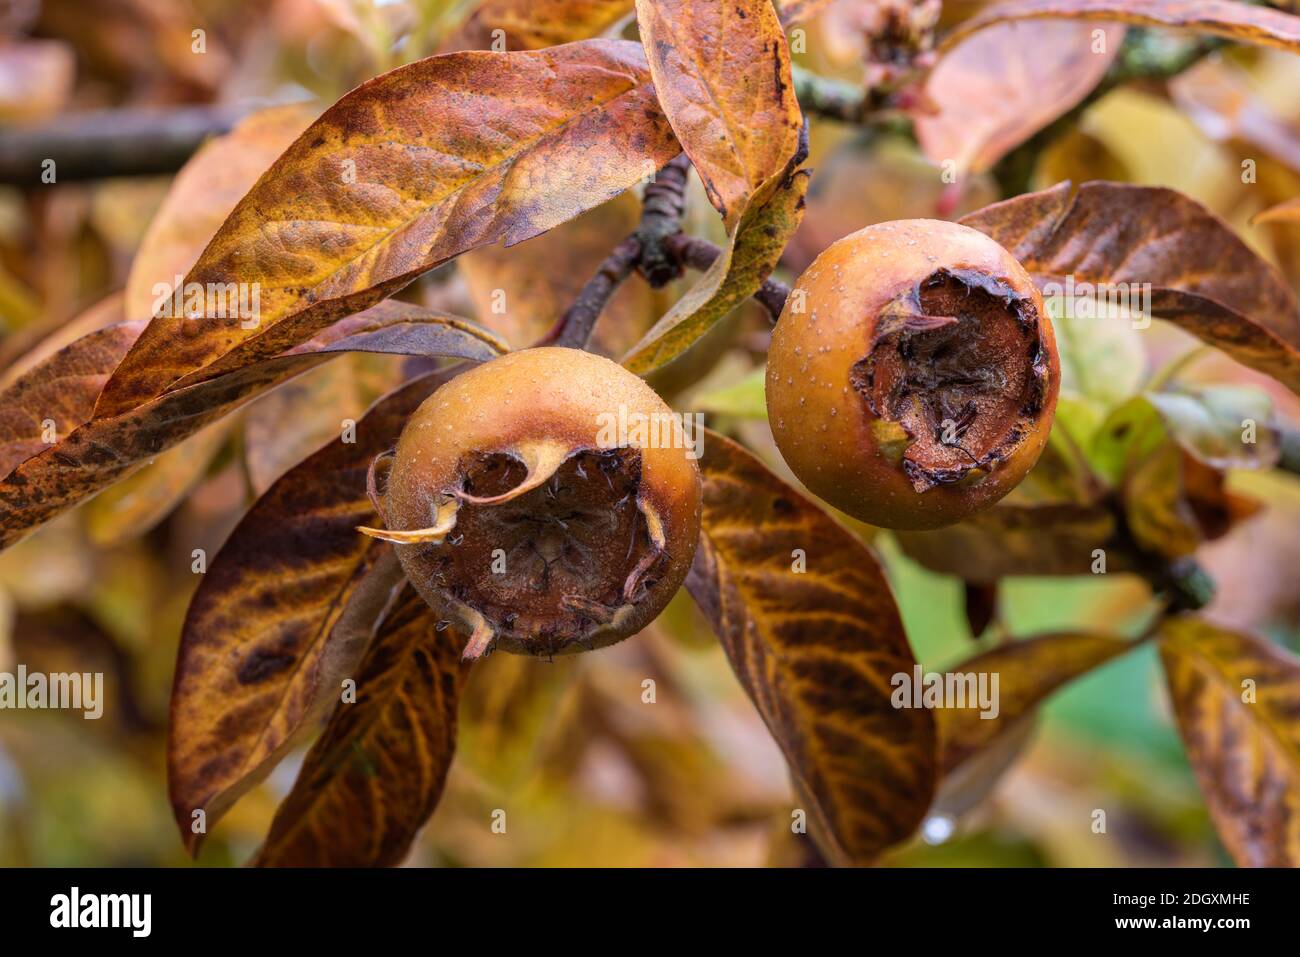 Ripe fruits of organic mature brown Medlar, Mespilus germanica, on tree in late autumn with green, yellow, brown autumnal leaves in the background. Stock Photo